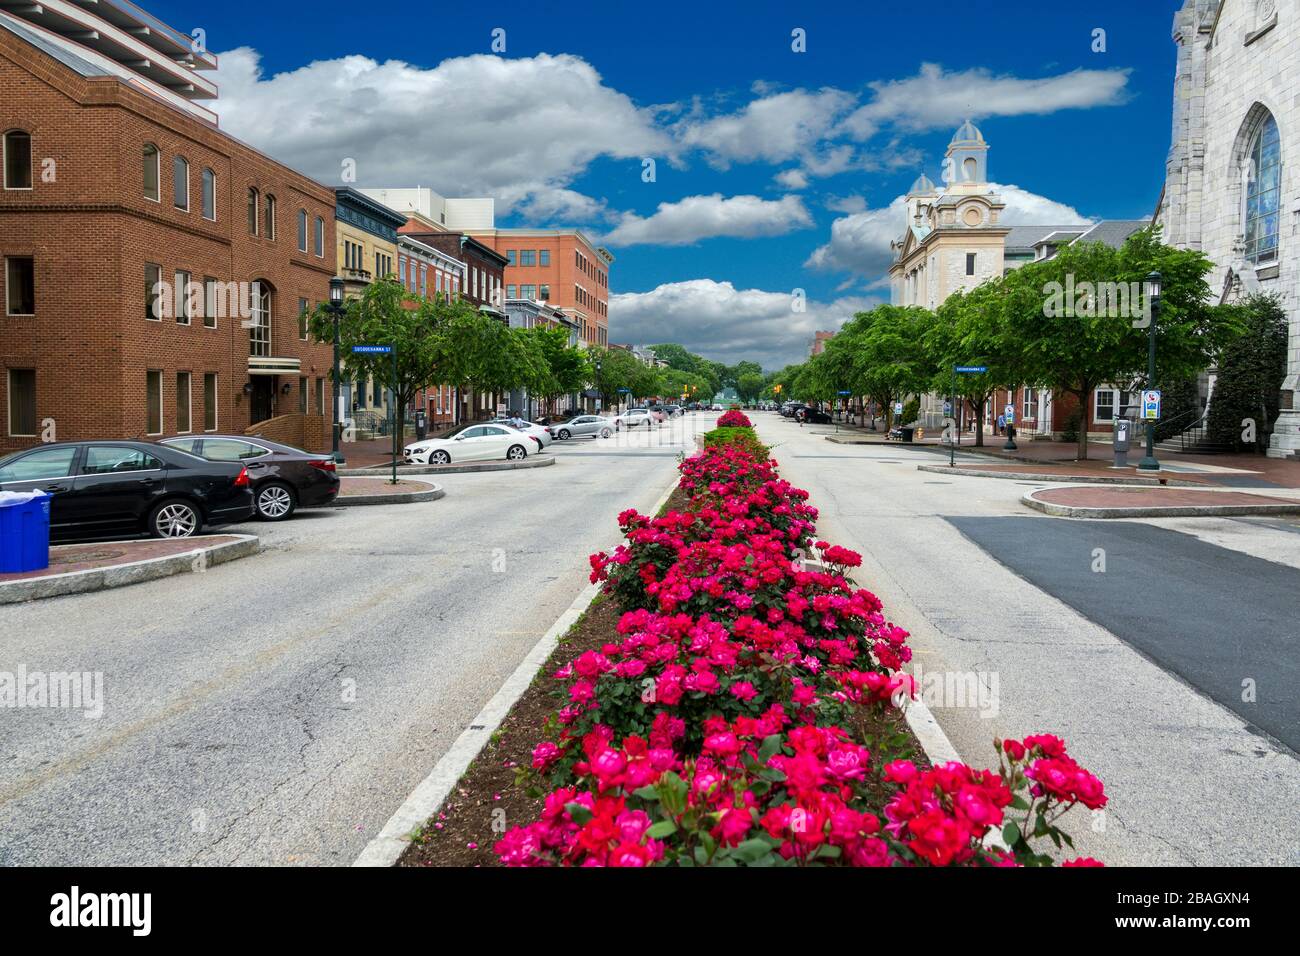 View of the historic downton district of Harrisburg Pennsylvania from the steps of the Capitol building Stock Photo